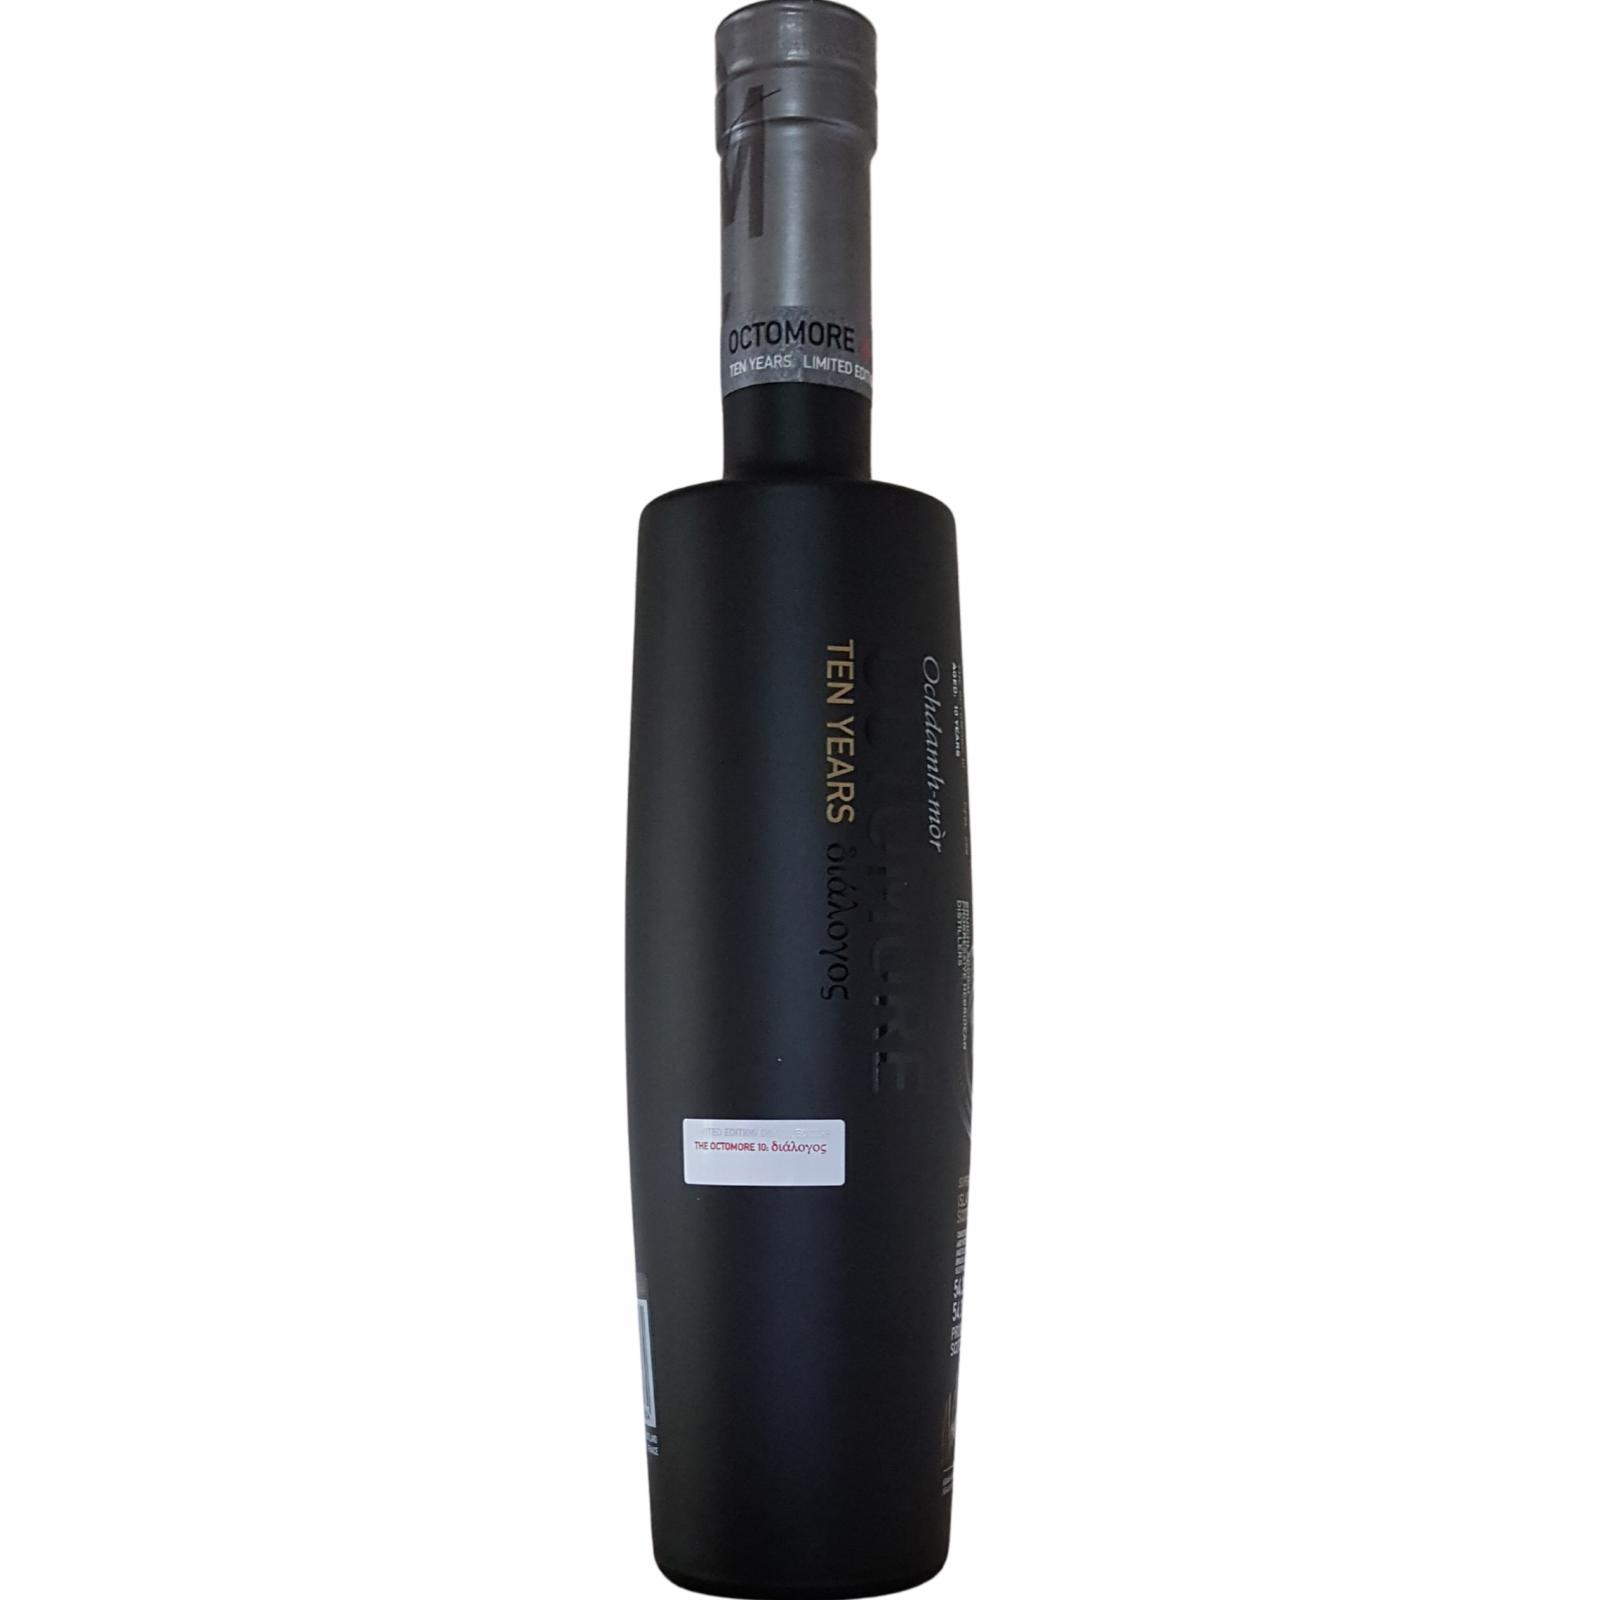 You are currently viewing Octomore 2009 10 years